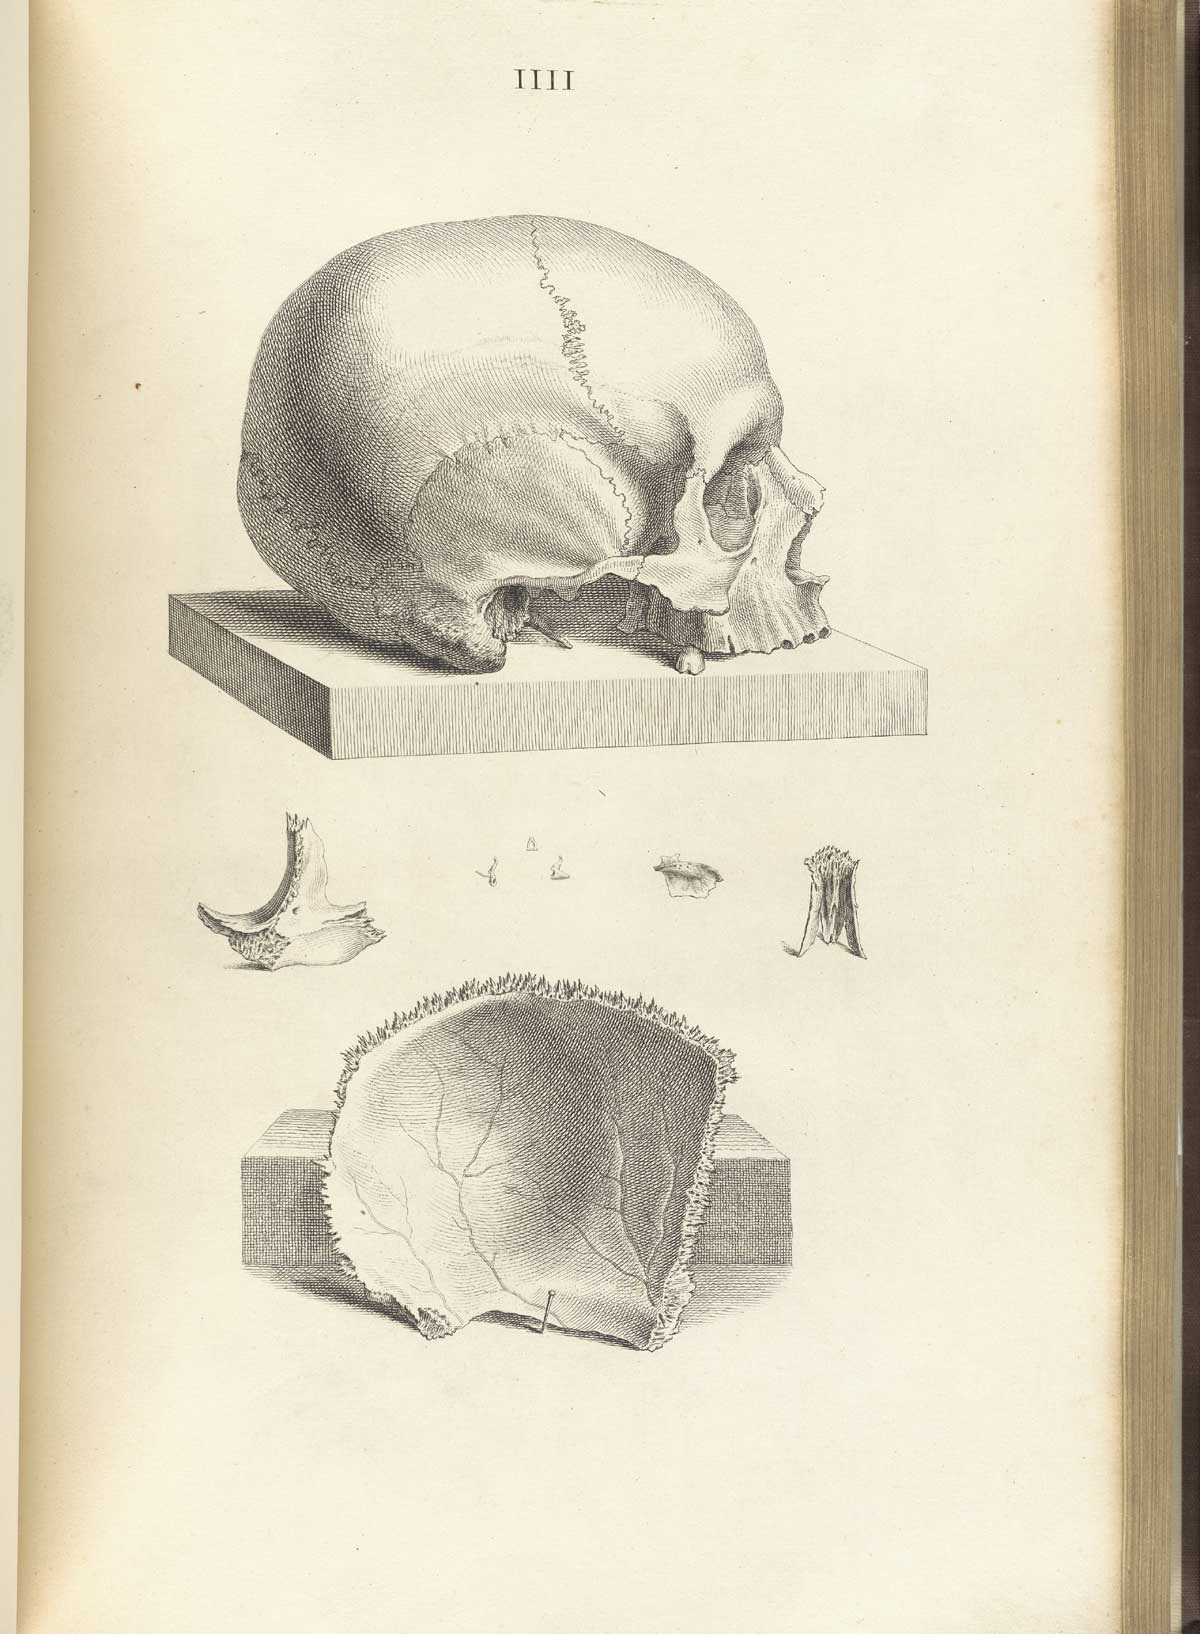 Engraving of a human skull without mandible on a wooden plank at top of the image with a parietal bone below exposed to view the interior, from William Cheselden’s Osteographia, NLM Call no.: WZ 260 C499o 1733.